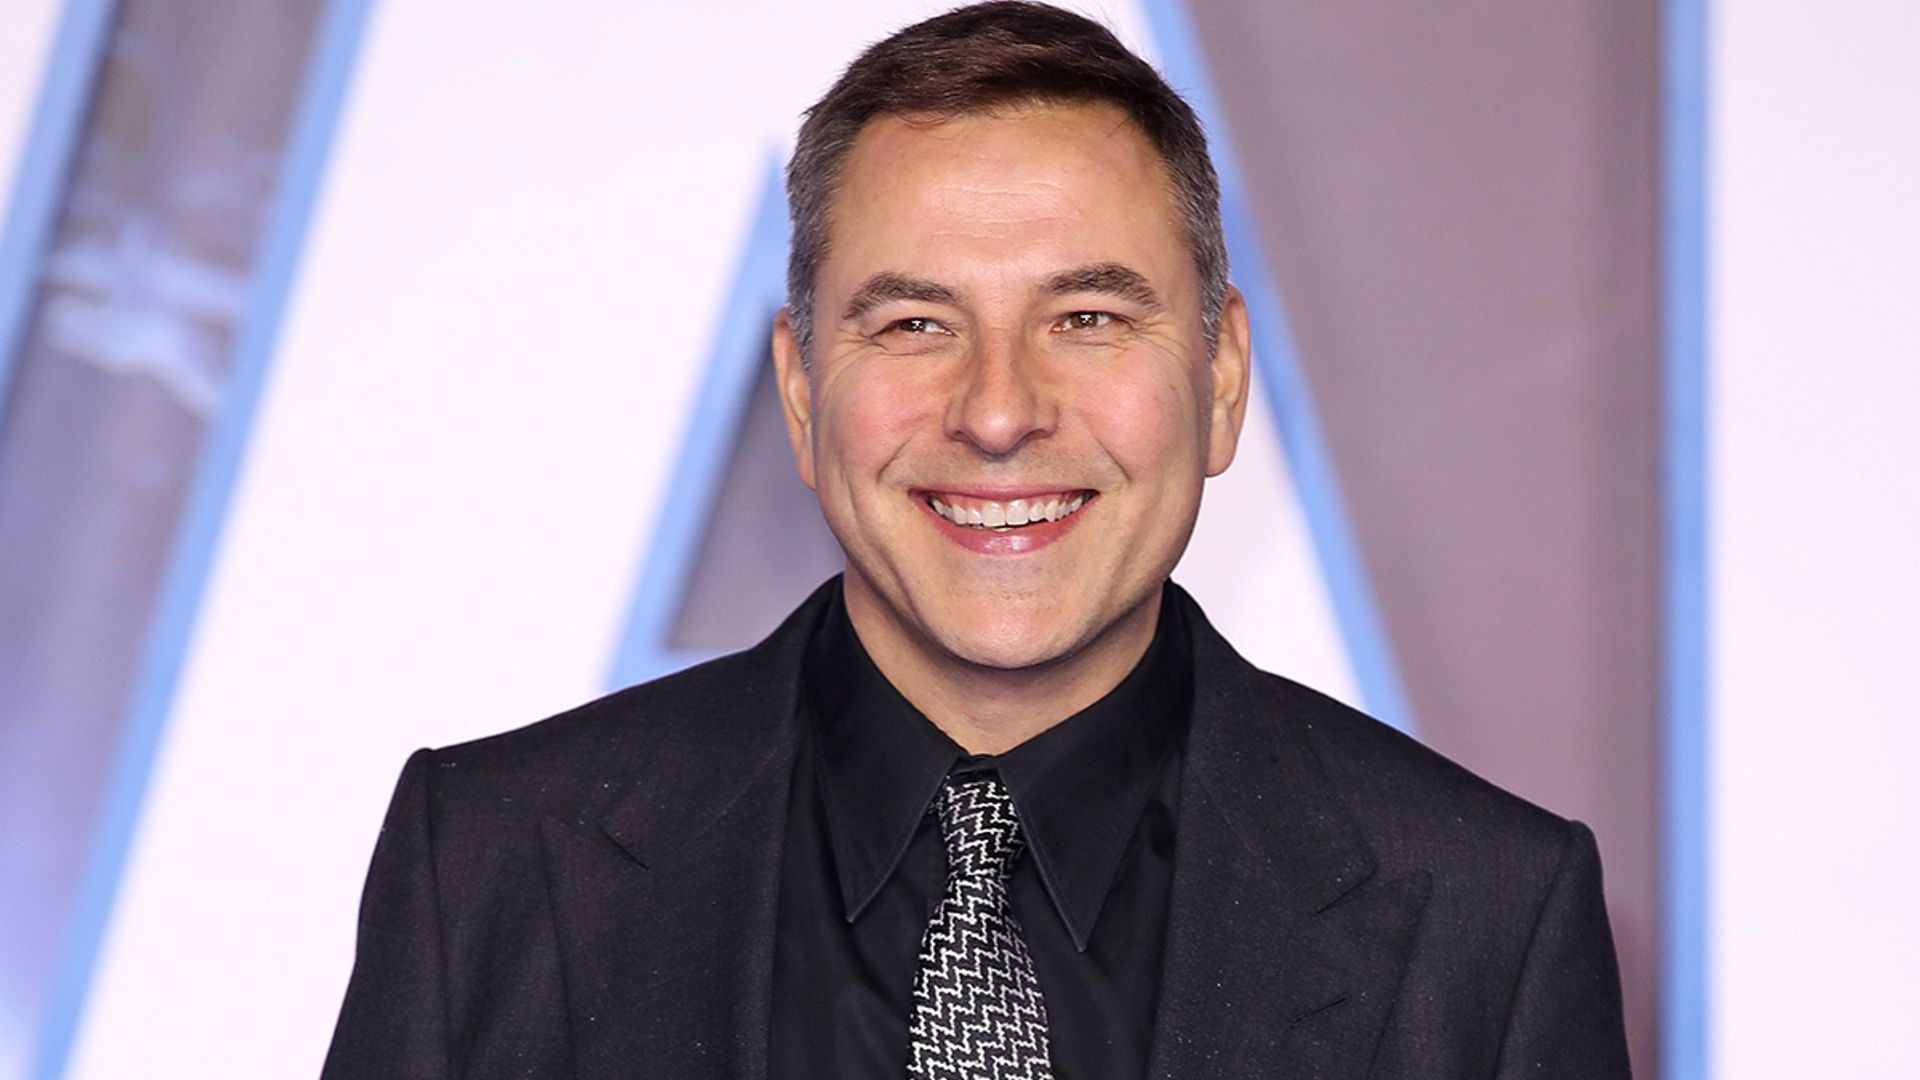 David Walliams shares photo with 'young son' – but it's not what it seems